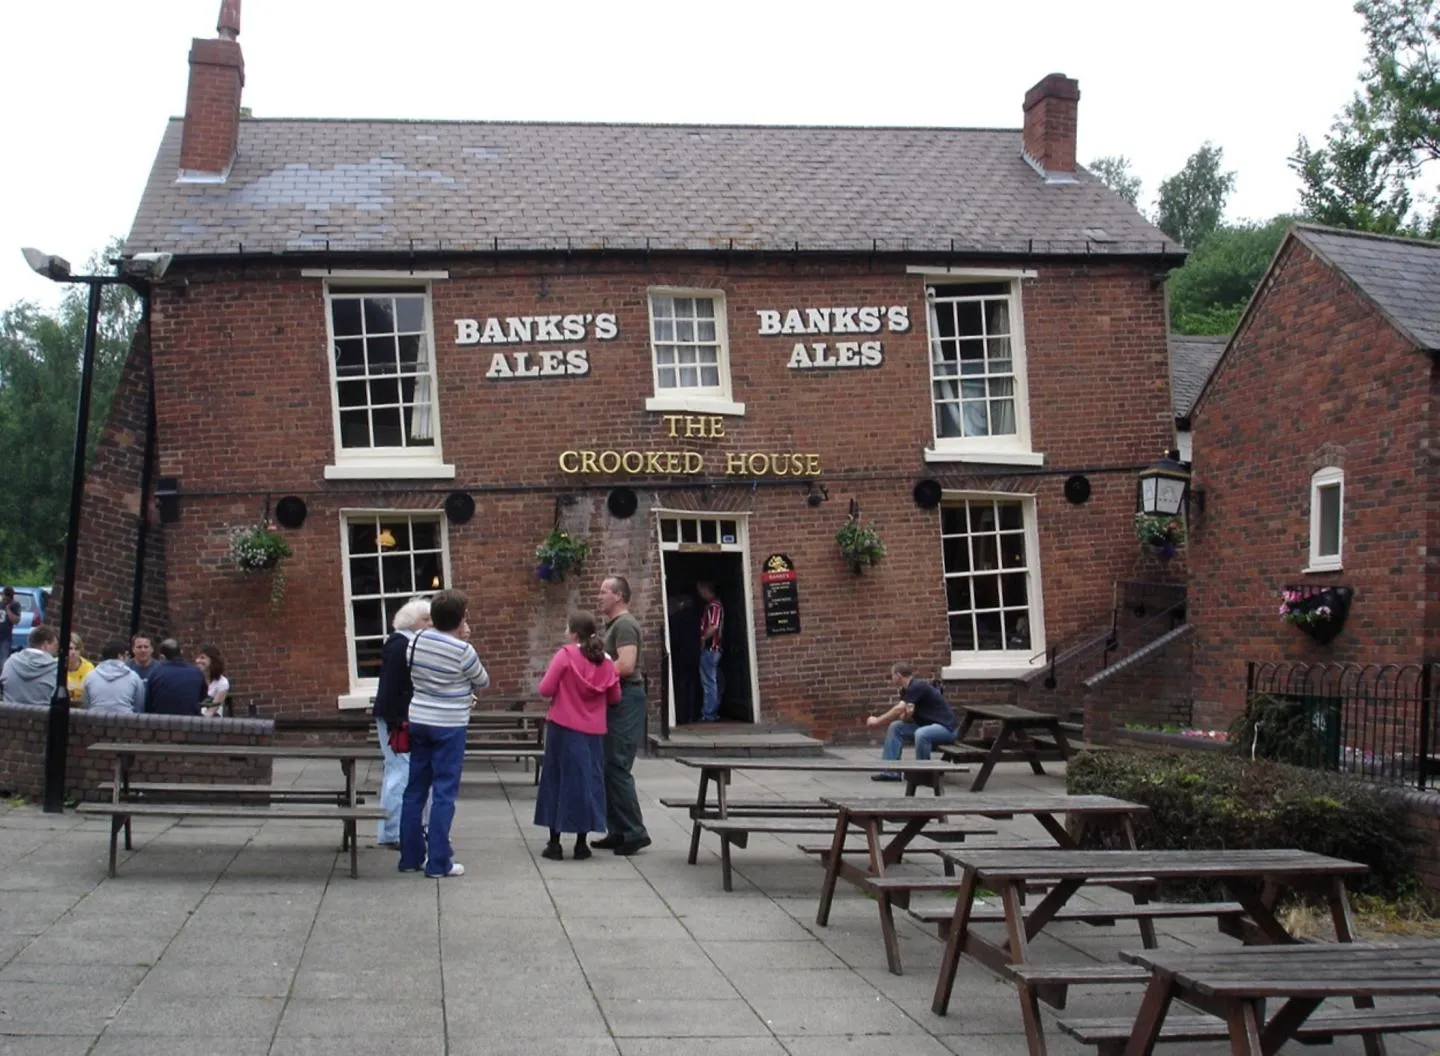 Exterior of Crooked House pub, Himley - photo: Peter Broster, Wikimedia Commons